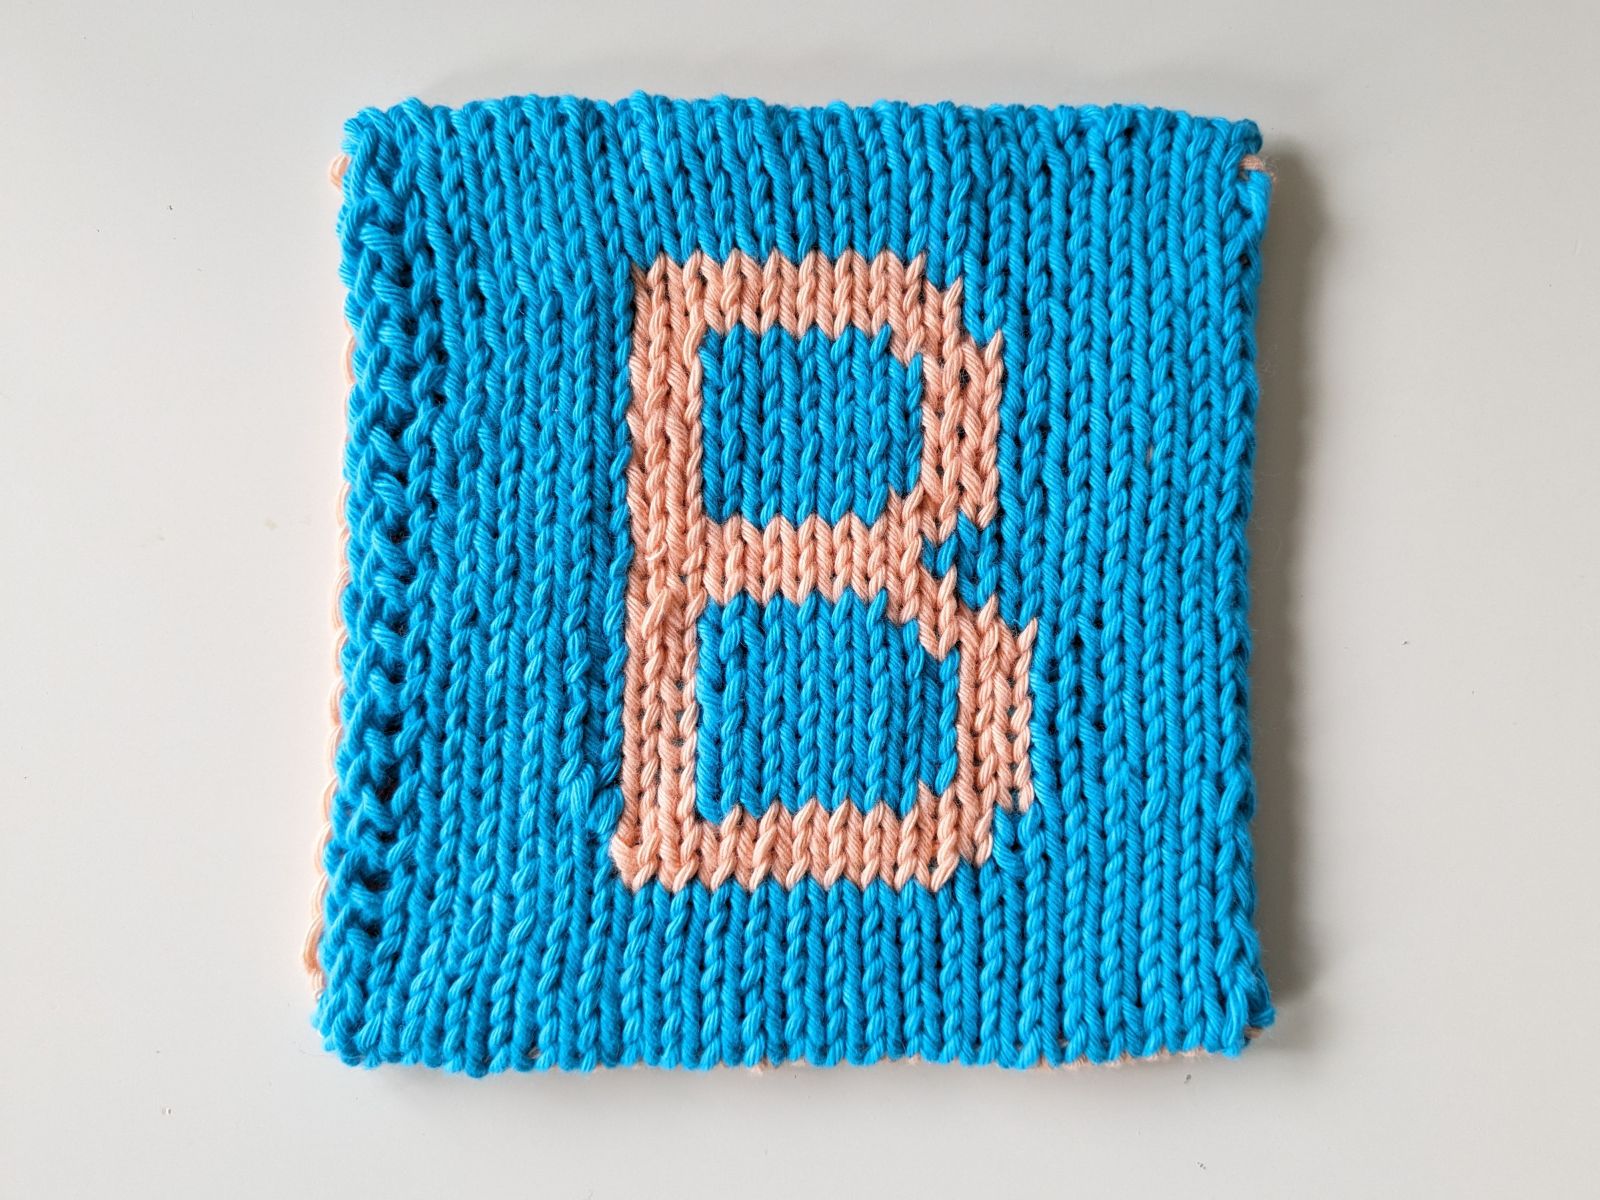 Blog content image for 'Free double knitting pattern for a "B"'